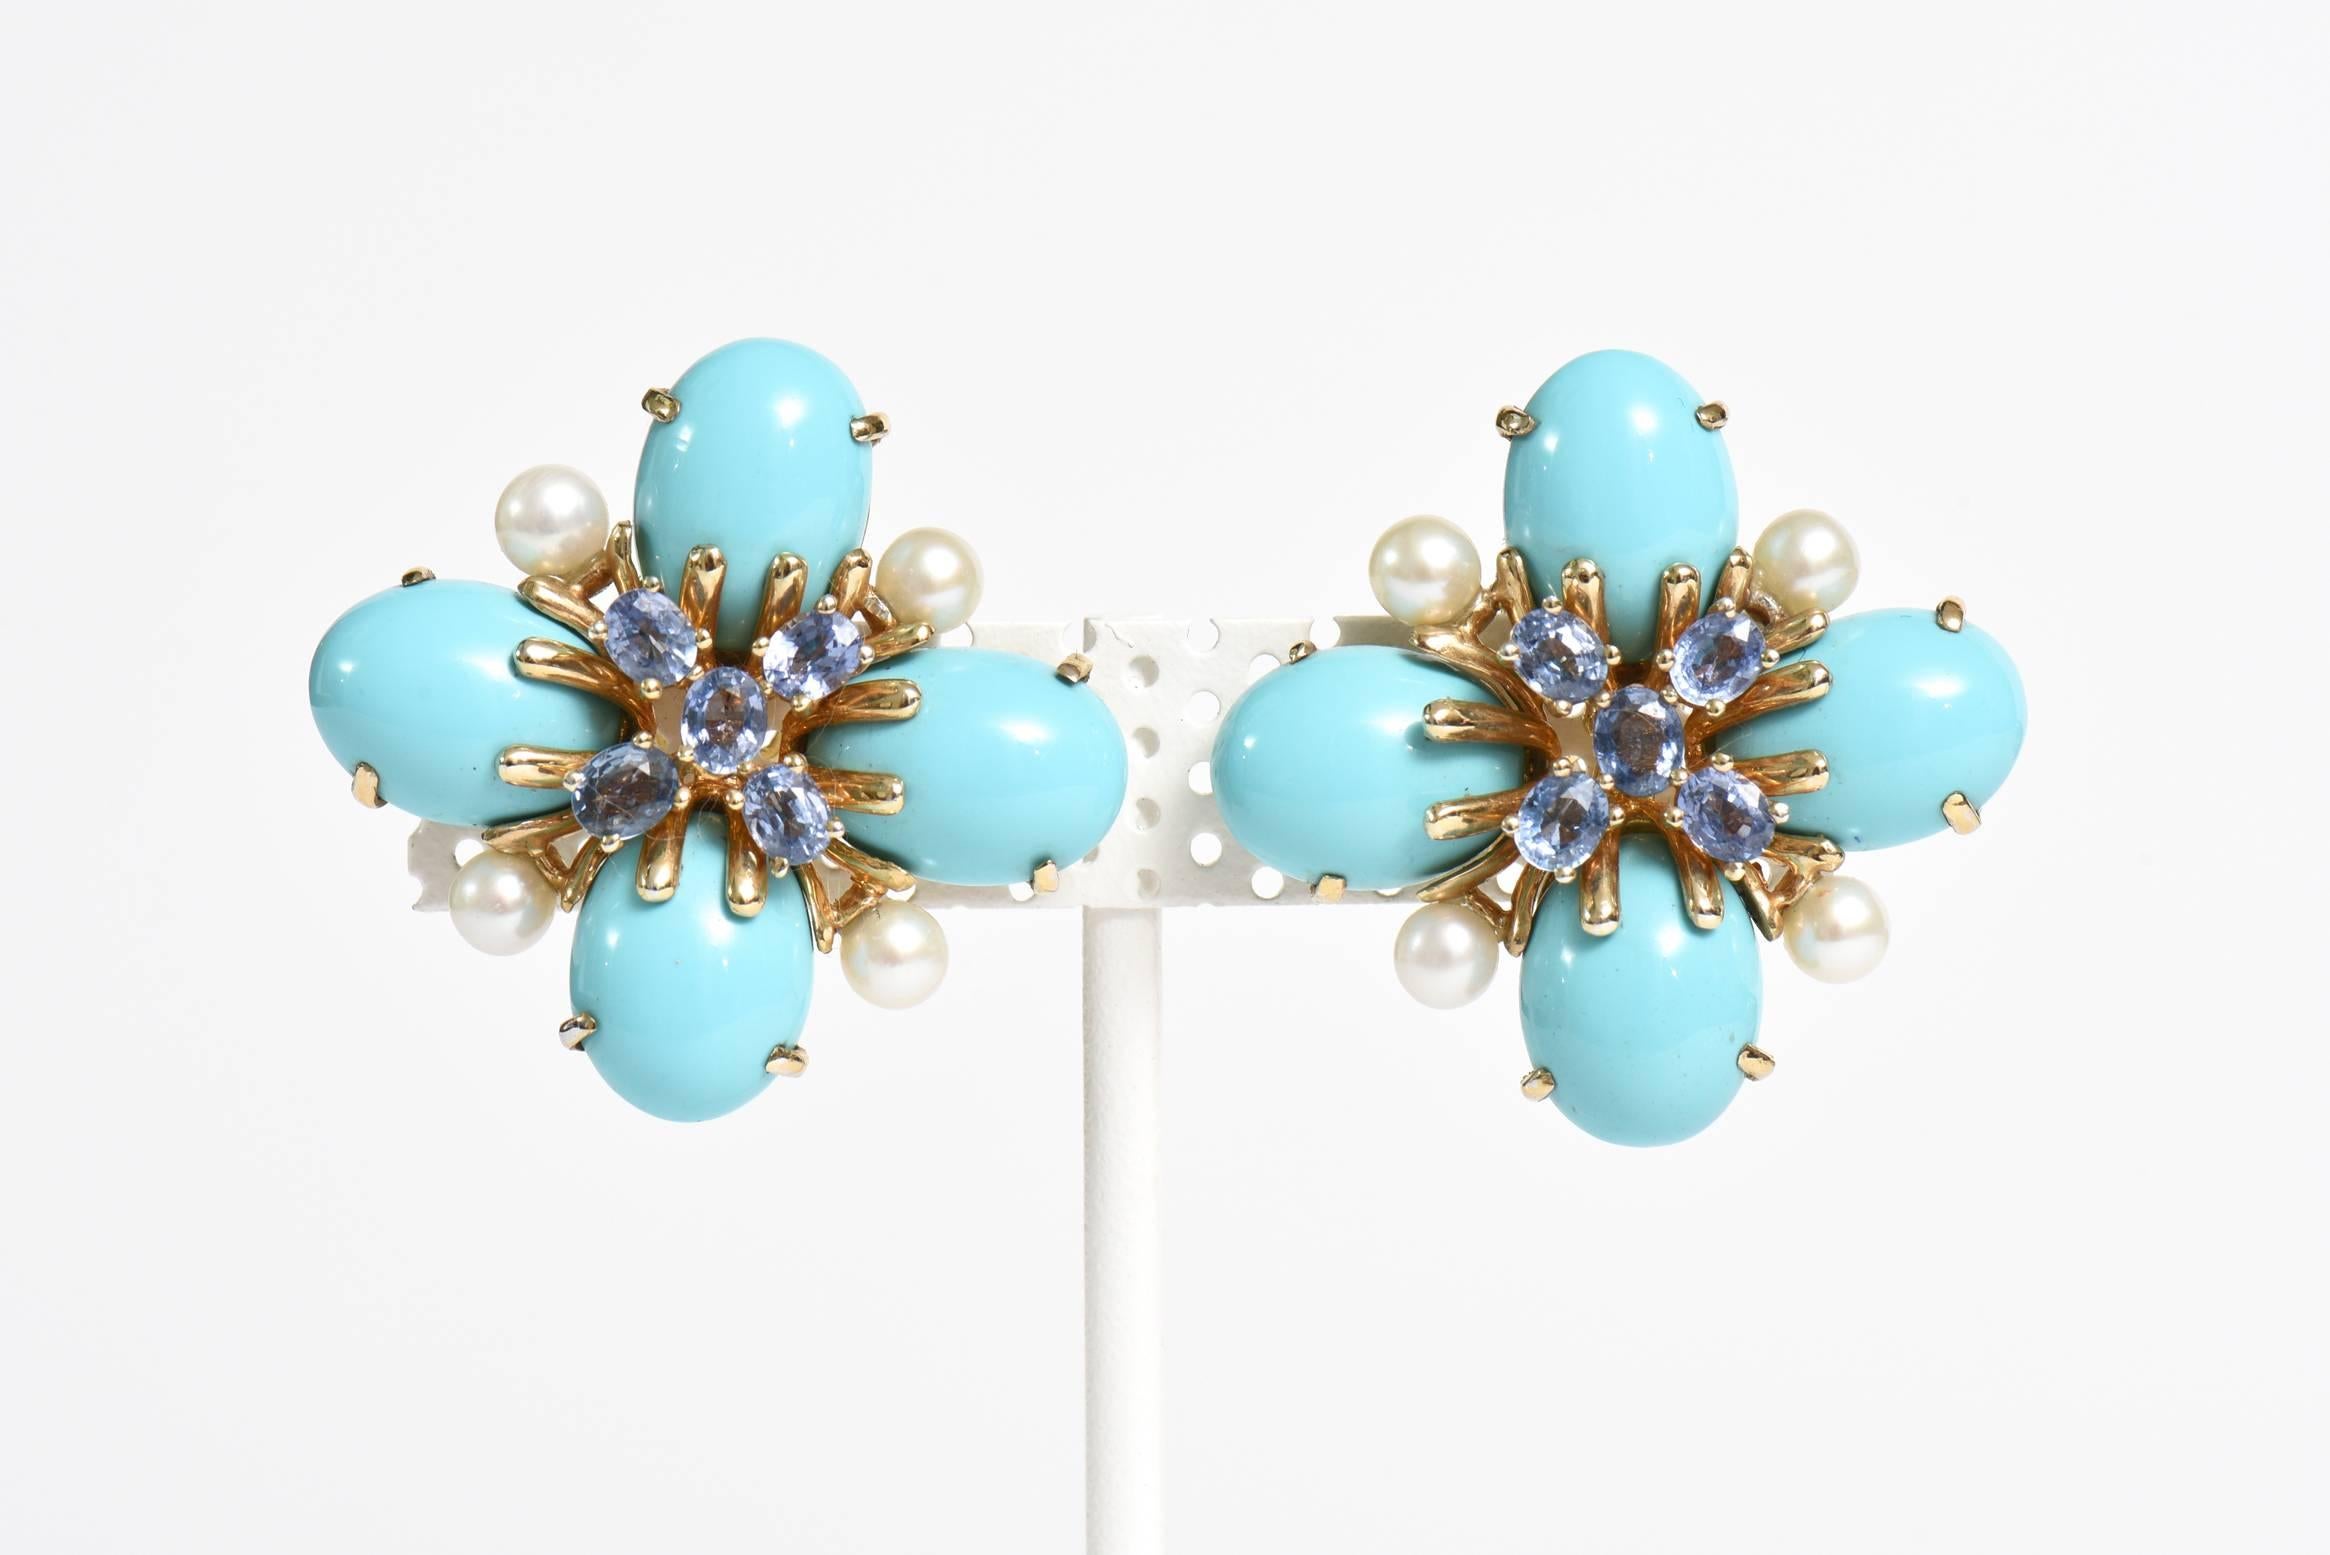 These stunning, elegant and timeless earrings are Italian custom made. They contain 8 5 MM cultured pearls and 10 sapphires of approx .4cts  in an 18 K gold setting with 4 pronged cabochon turquoise stones on each ear totaling 8  turquoise stones.